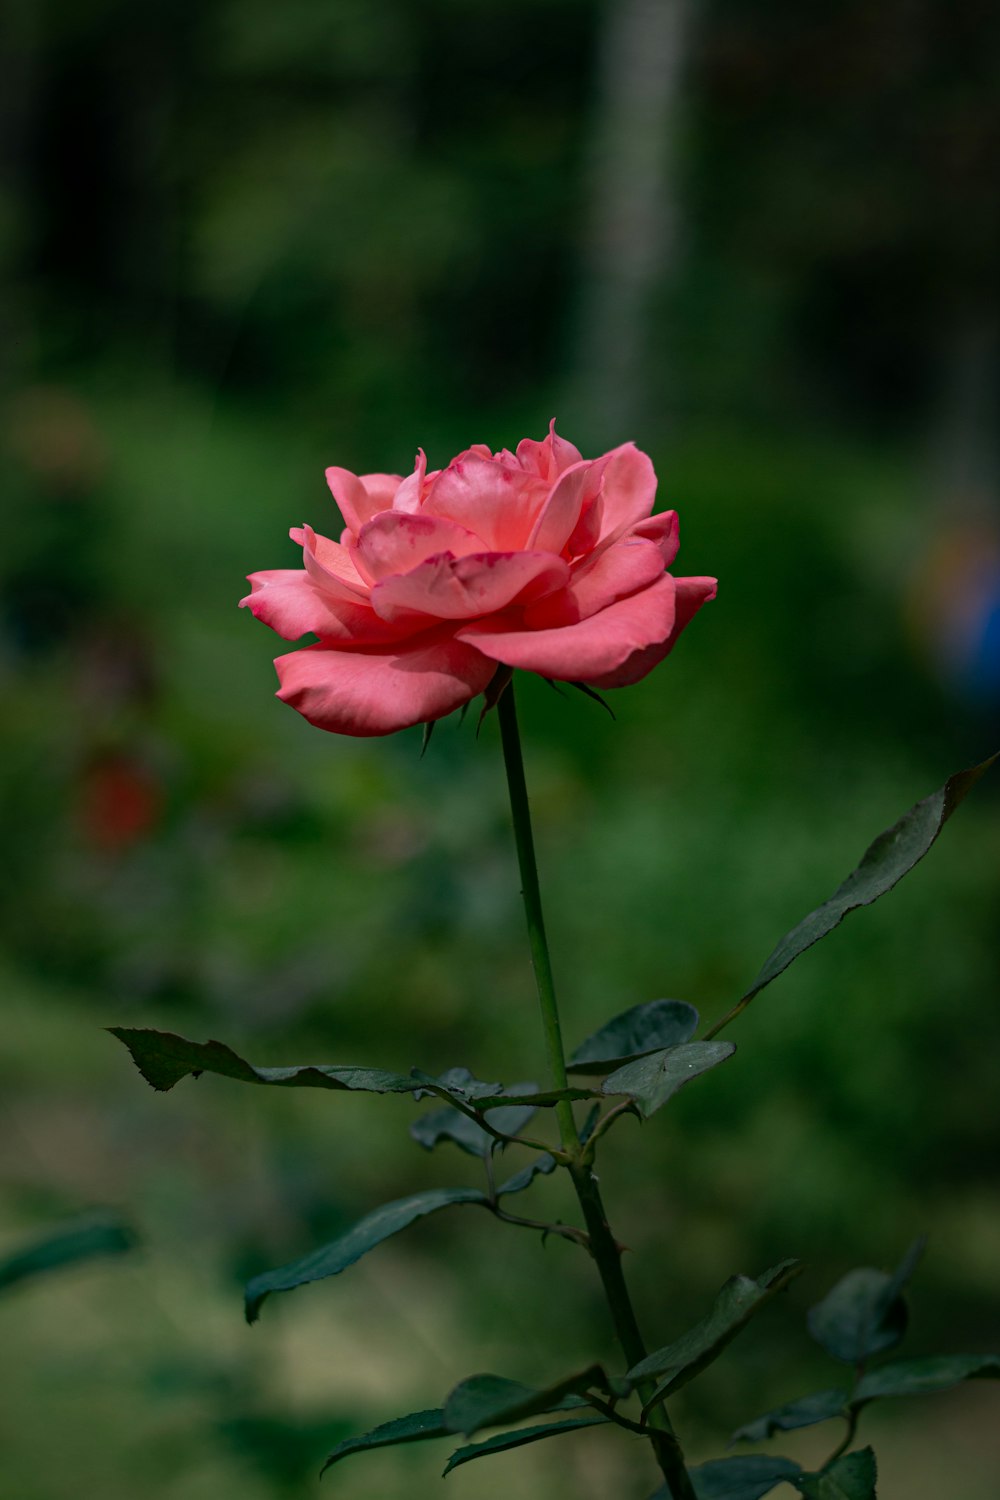 a single pink rose is blooming in a garden